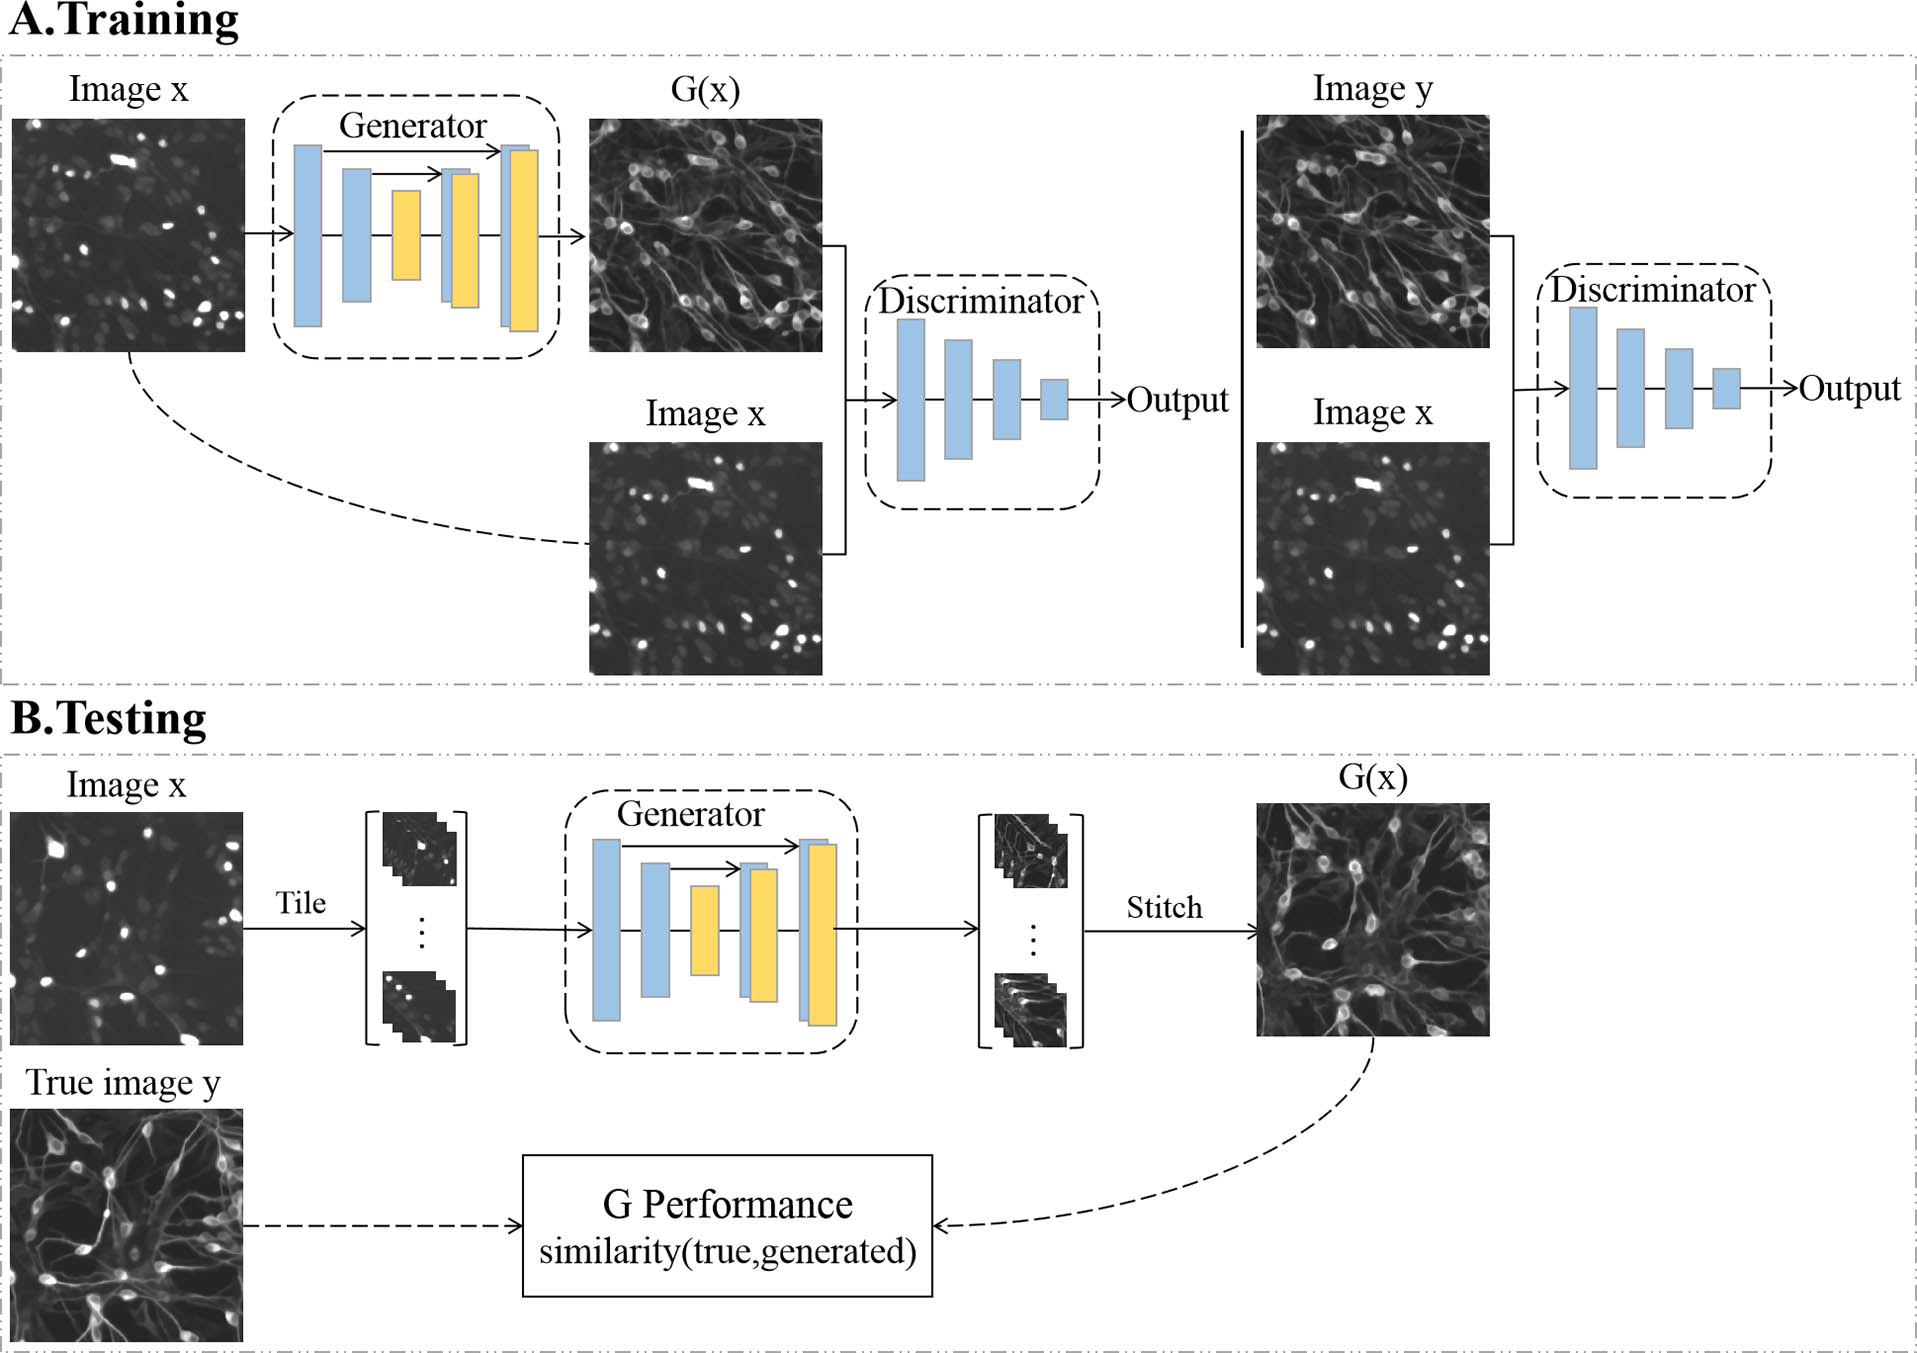 cGAN framework for Fluo-Fluo translation based on deep learning. (A) The generator network attempts to generate image y with respect to image x, and the discriminator network attempts to distinguish between the generated image y and the true image y. There is a competitive relationship between these two networks. Briefly, image x is used as the input of the generator to obtain the generated image G(x), and then G(x) and x are combined as the input of the discriminator. During training, two error functions are calculated: (i) L1 and MS-SSIM loss functions are used to measure the similarity between the generated image G(x) and the target image y; (ii) the cGAN error attempts to distinguish the generated image G(x) from the target image y corresponding to the input image x. The combined loss functions are optimized by the Adam algorithm. (B) Once trained, the generator can immediately predict the fluorescence image y from the fluorescence image x of the test dataset.